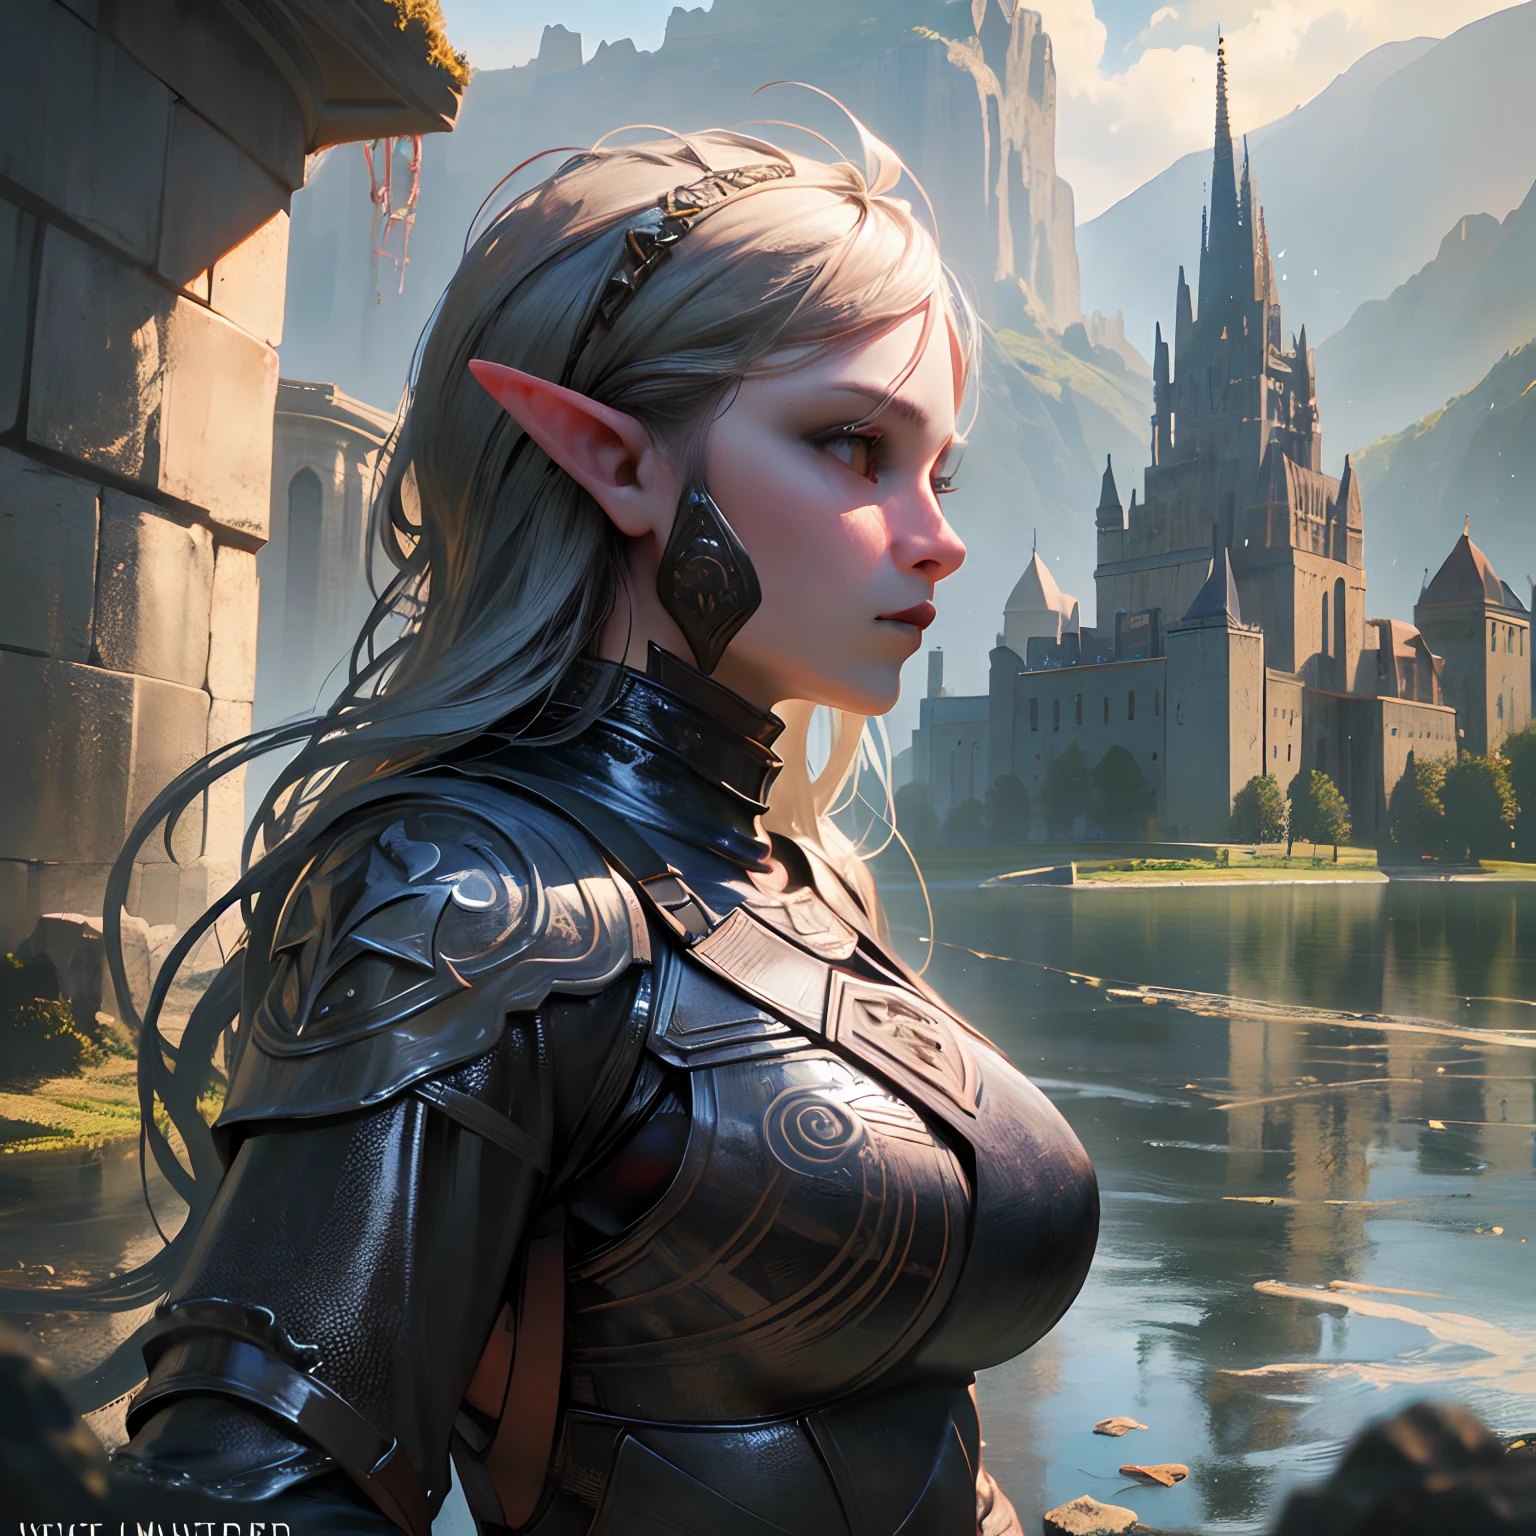 arafed, high details, best quality, 8k, [ultra detailed], masterpiece, best quality, (extremely detailed), dynamic angle, ultra wide shot, RAW, photorealistic, fantasy art, d&d art, a wide angle picture of a half elf cleric in  a temple near the lake, female, half elf (Masterpiece 1.5, intense details), black haired, green eyes, braided hair, long hair (Masterpiece, intense details), [small pointed ears], cleric, templar (1.3 Masterpiece, intense details dnd art), ultra detailed face, casting a spell (1.4 Masterpiece, intense details dnd art), wearing white plate mail armor with sigils ( 1.5 Masterpiece, intense details) GlowingRunes_paleblue, carrying flaming sword (Masterpiece 1.5, intense details), wearing white cloak with sigils (Masterpiece 1.4, intense details), holy symbol, standing near a lake (Masterpiece 1.5, intense details), dawn light, backlight, dynamic angle, reflection (1.5 Masterpiece, intense details) glowing light, high details , ray tracing, reflection light, silhouette, wide shot, panorama, Ultra-Wide Angle, high detail, award winning, best quality, HD, 8K, 3D rendering, high details, best quality, highres, ultra wide angle, 3D rendering, [[anatomically correct]]